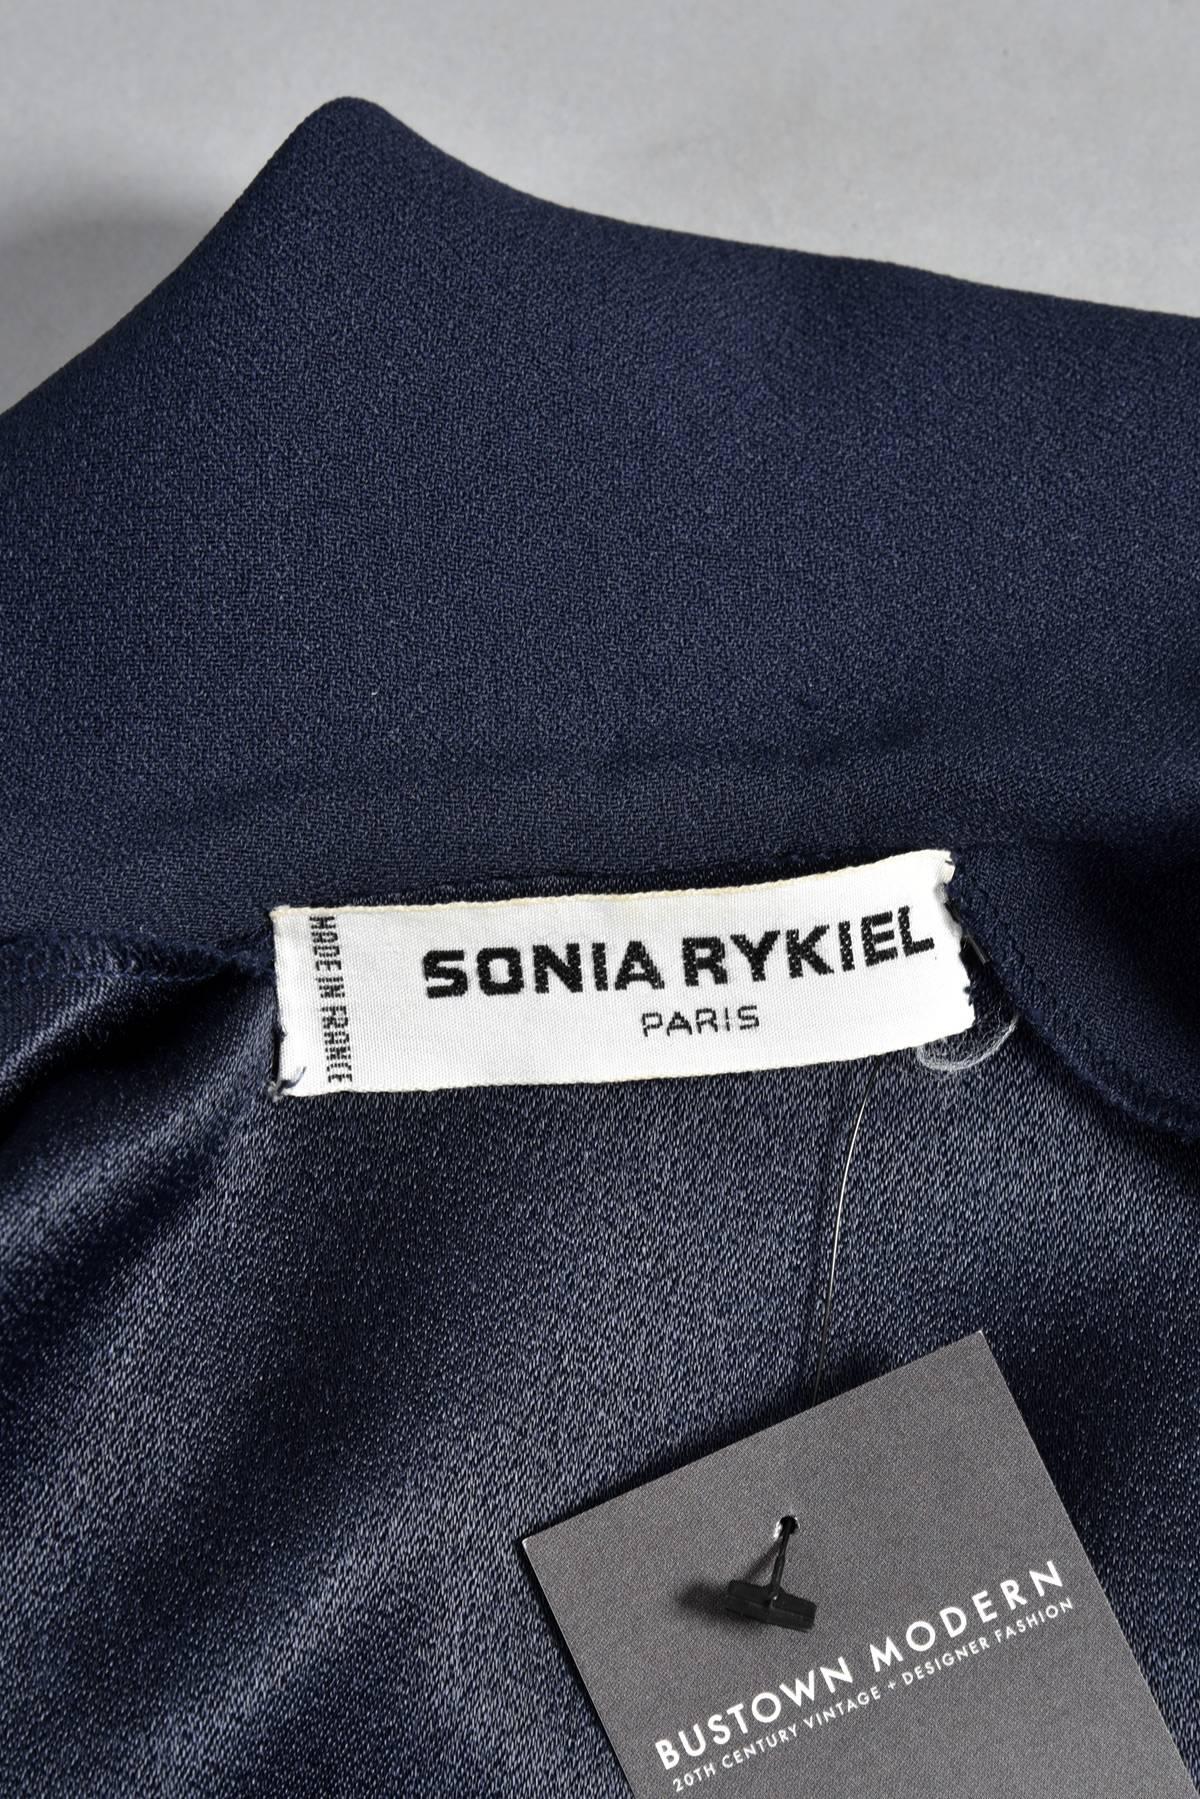 Sonia Rykiel Sailor Inspired Gaucho Pant Suit For Sale 5